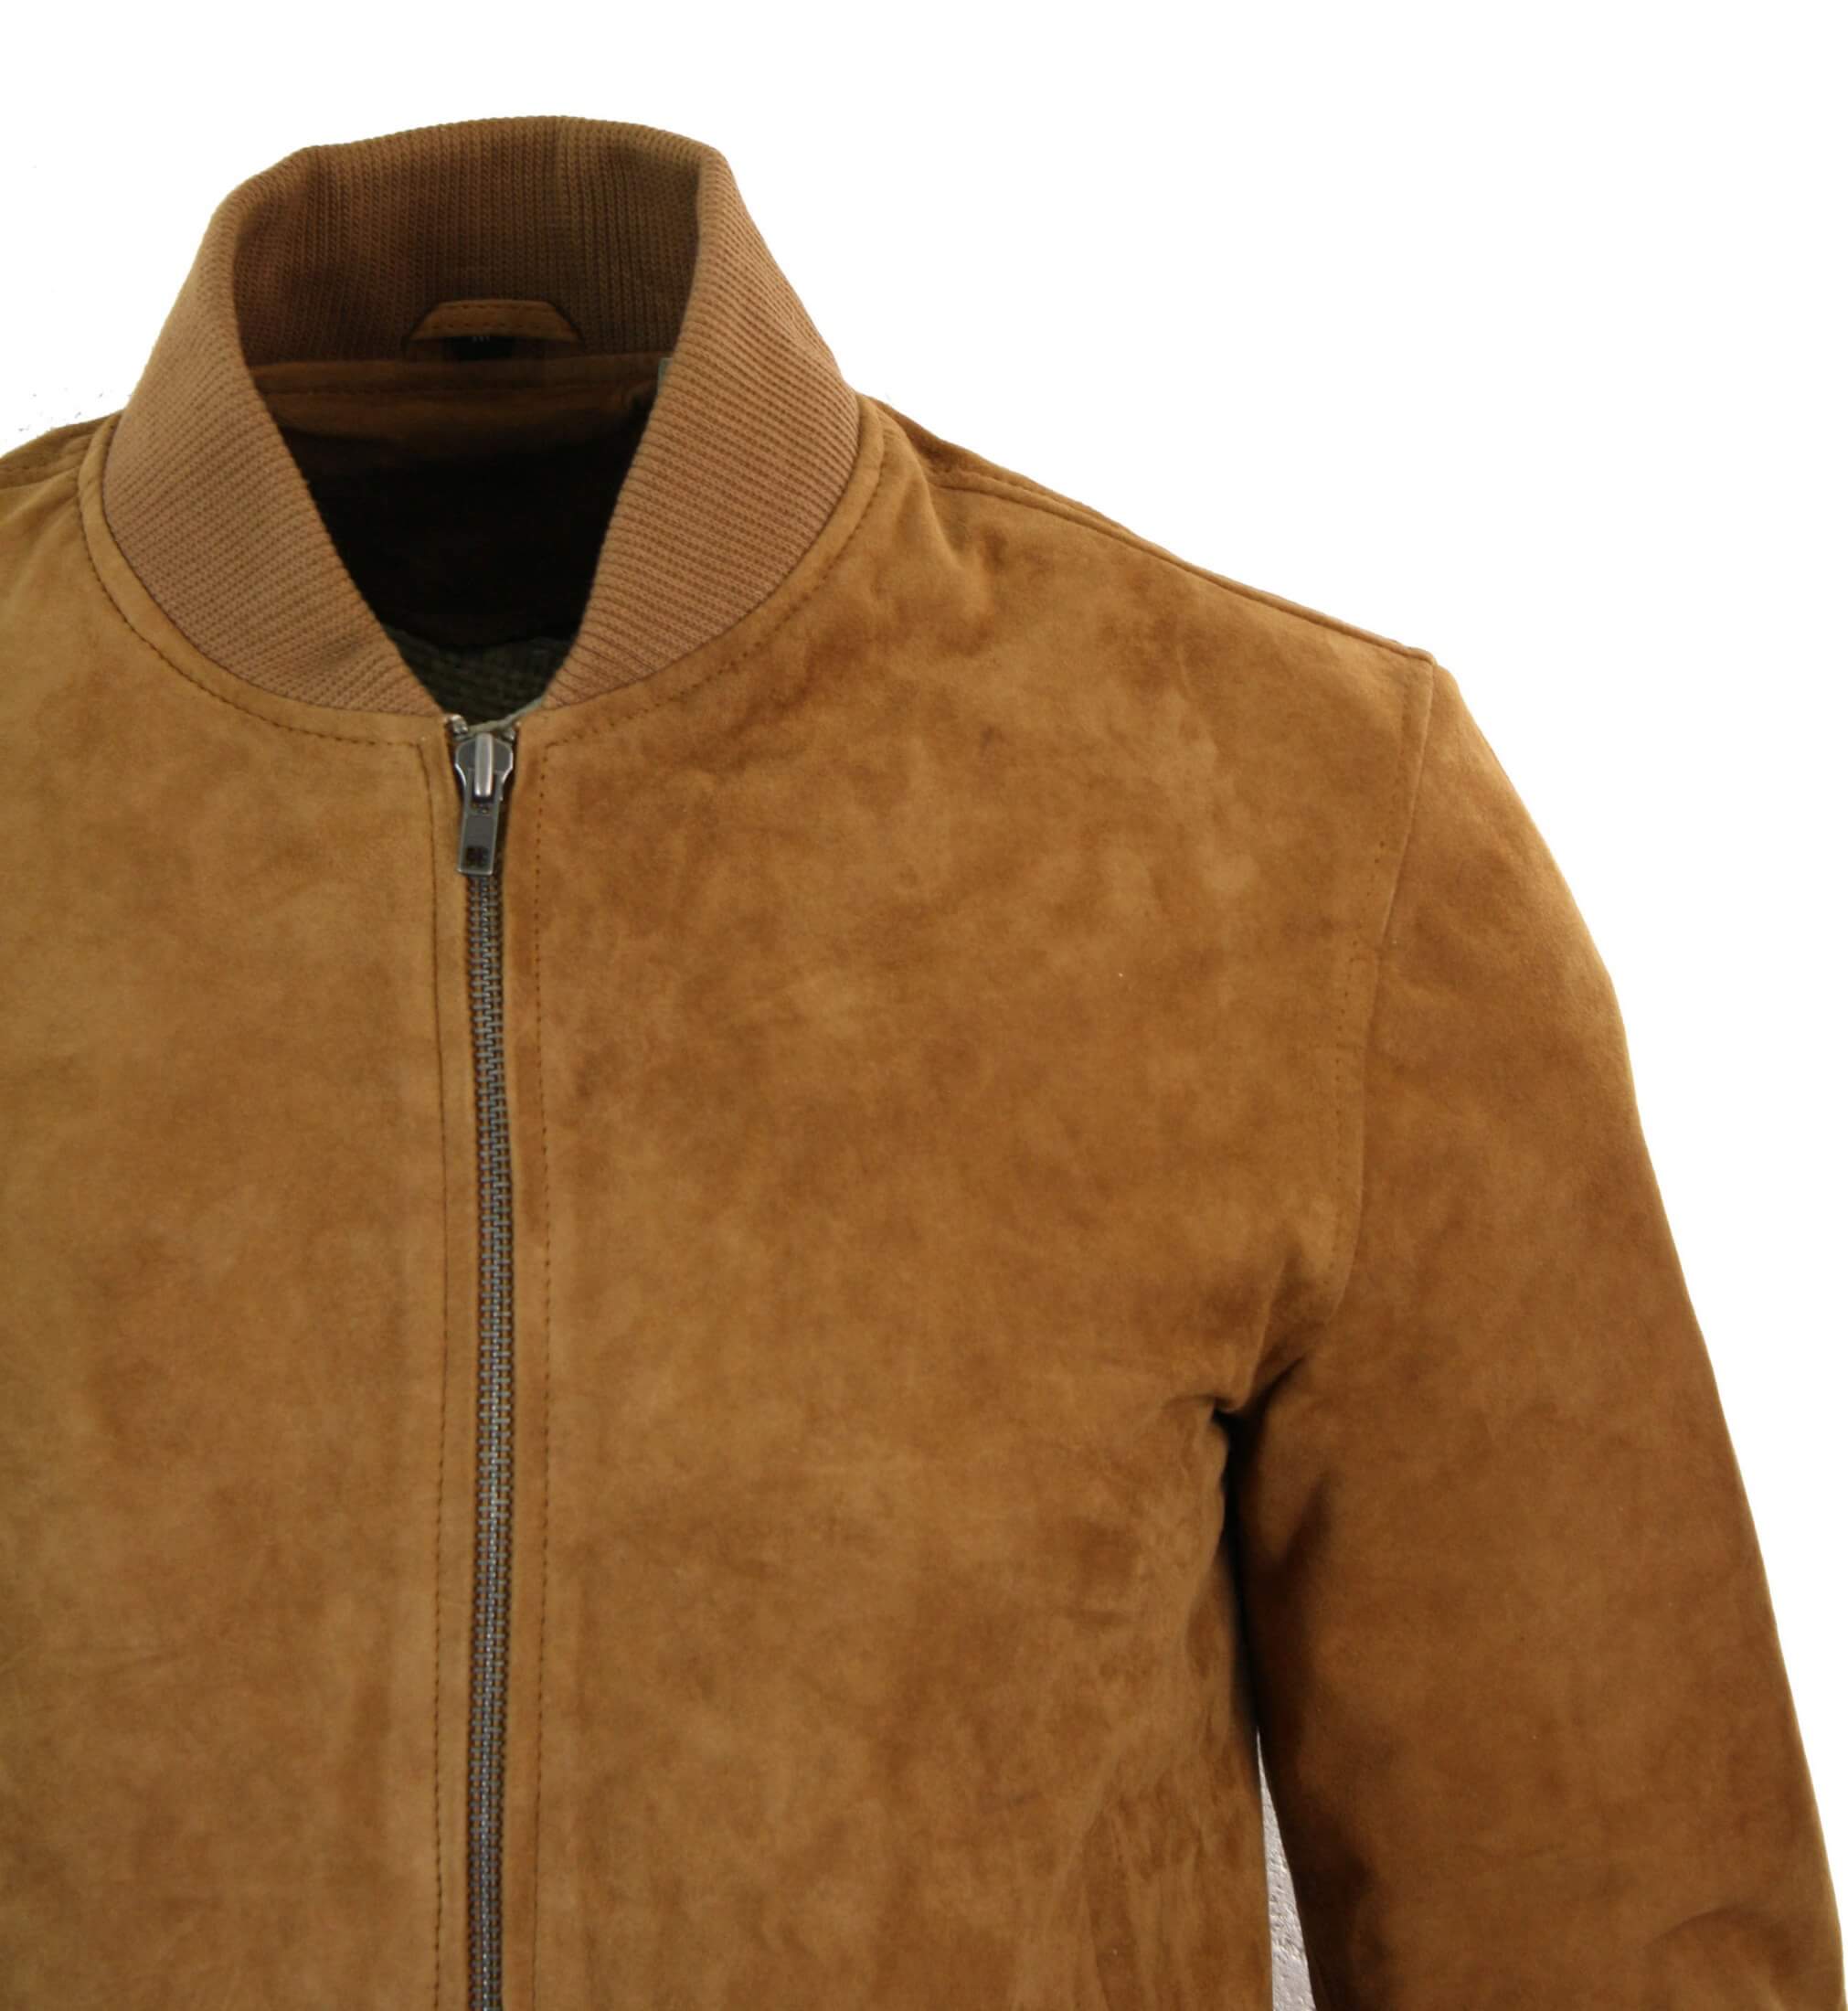 Mens Classic Fitted Bomber Suede Jacket Designer College Boy Varsity Brown